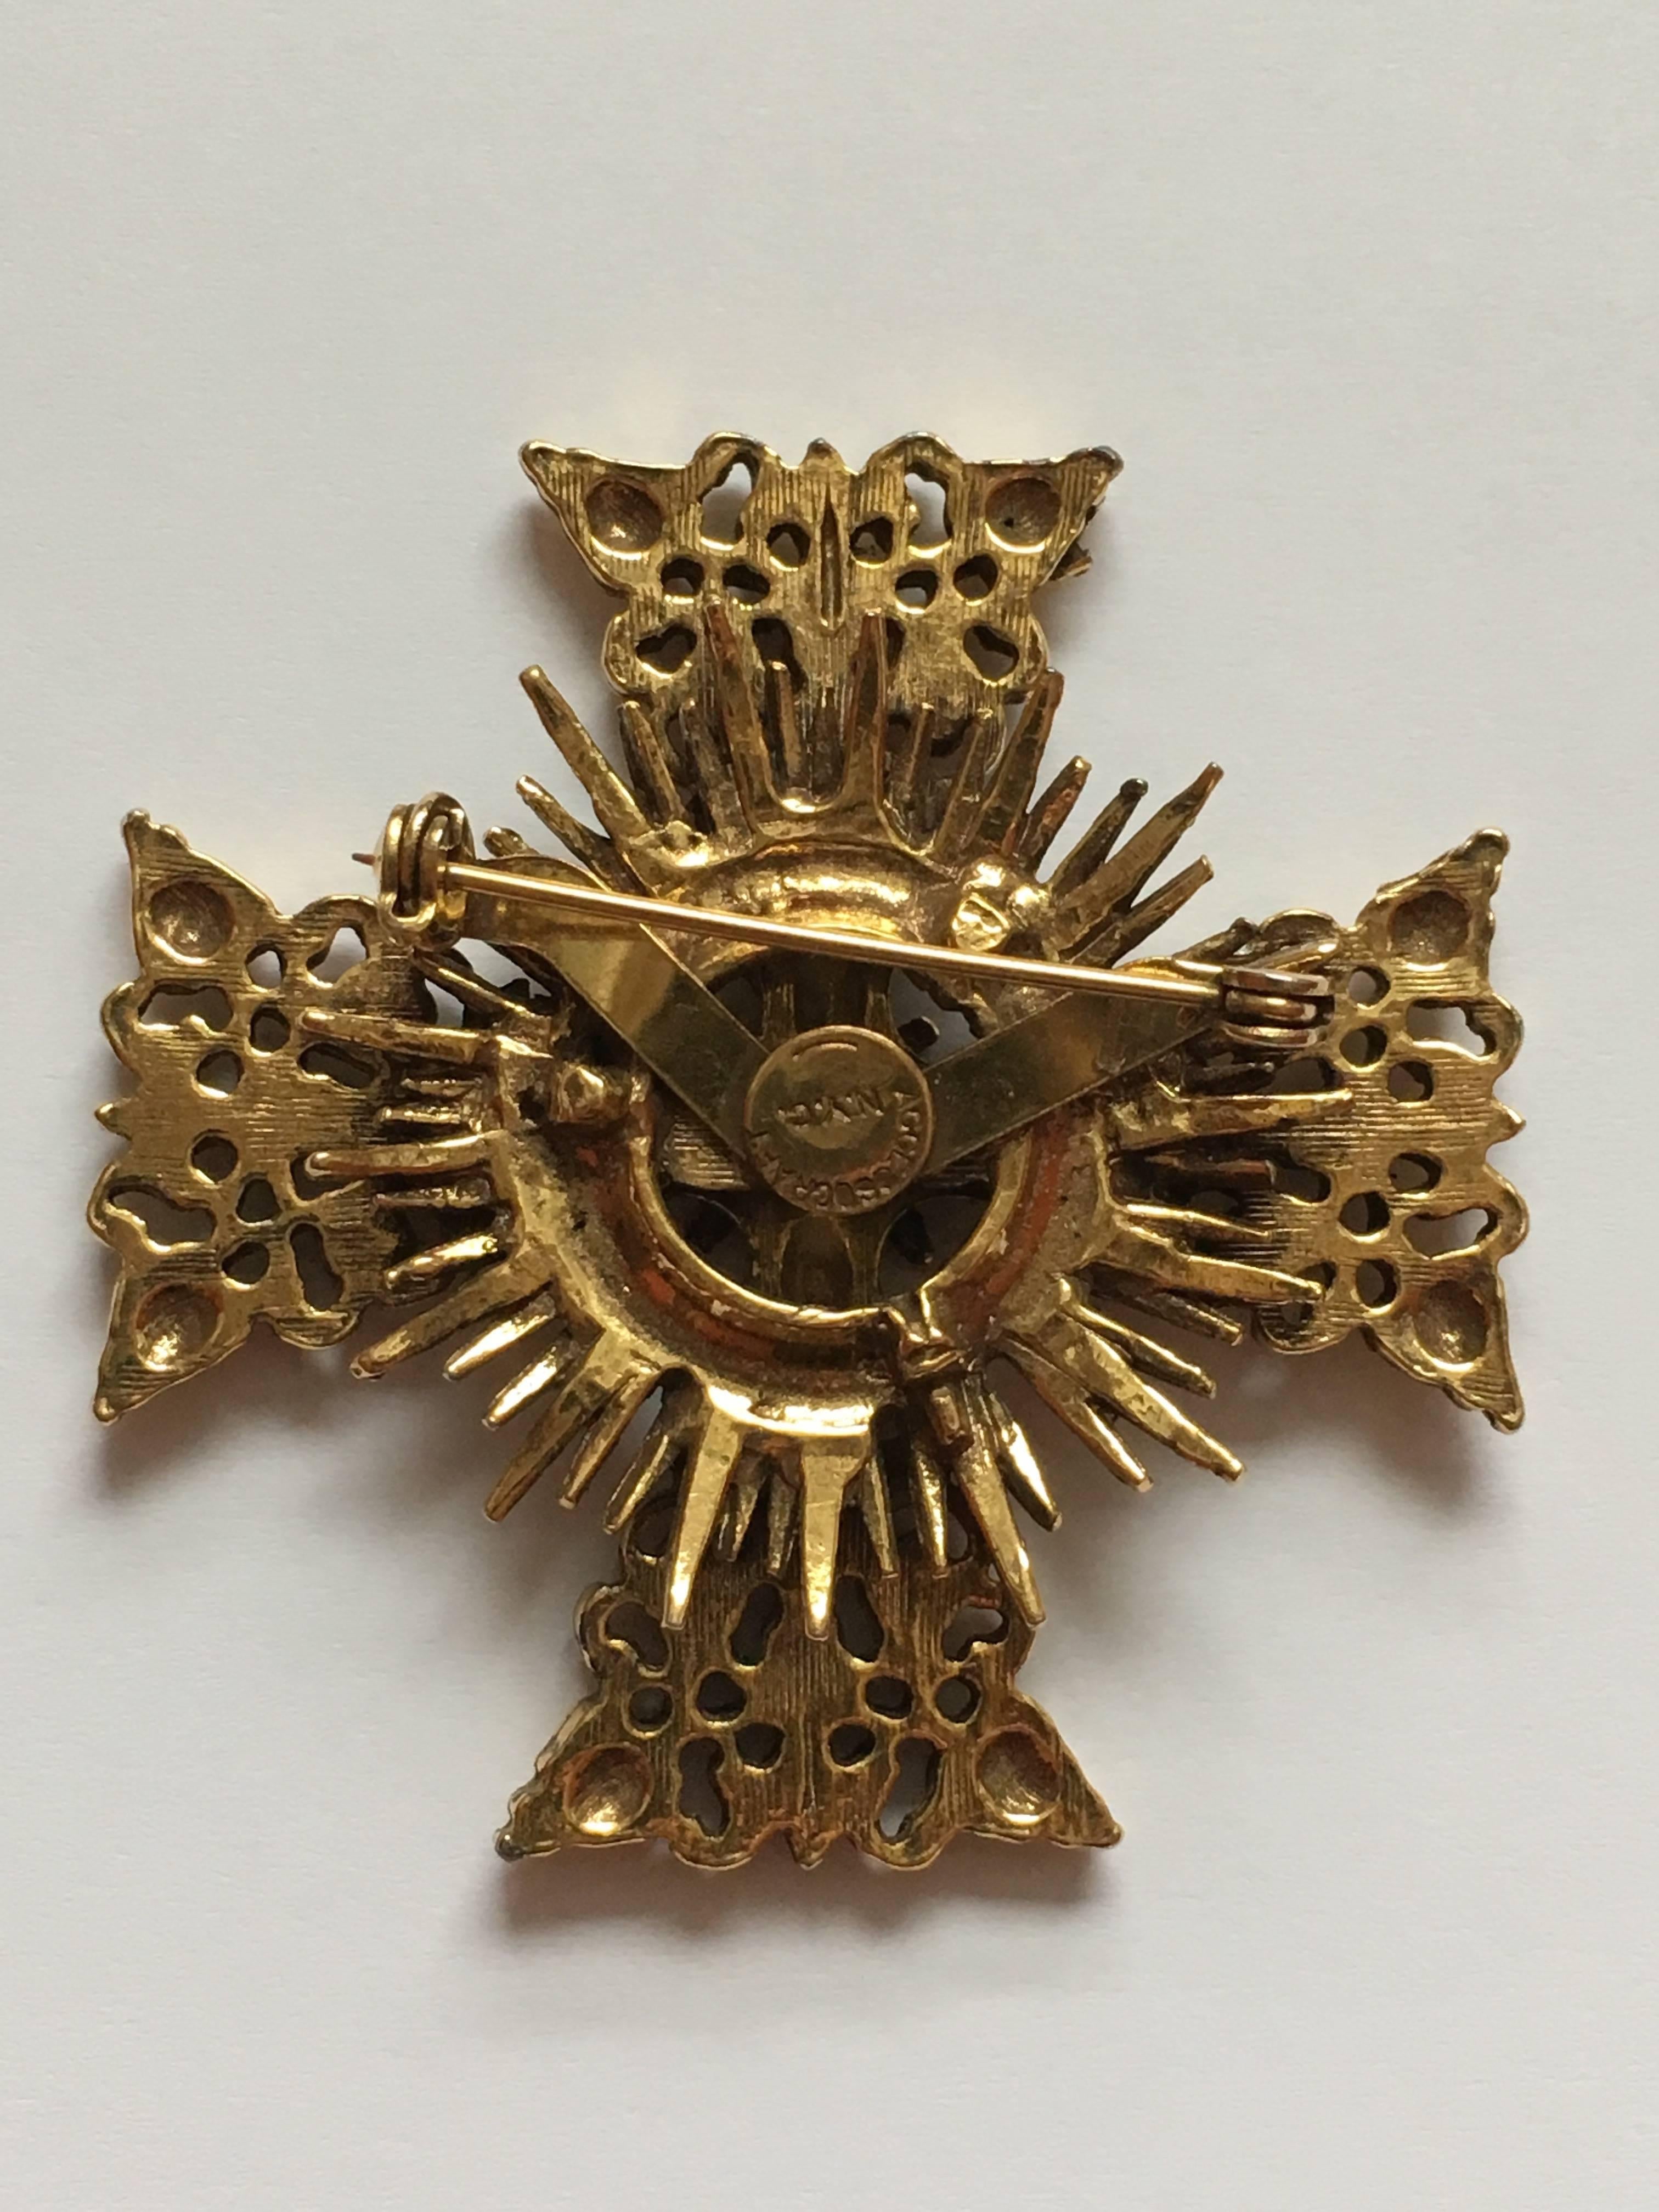 This is a 1960s Accessocraft gold-tone maltese cross brooch. It is in excellent condition and signed, 'Accessocraft N.Y.C.' on the back. 